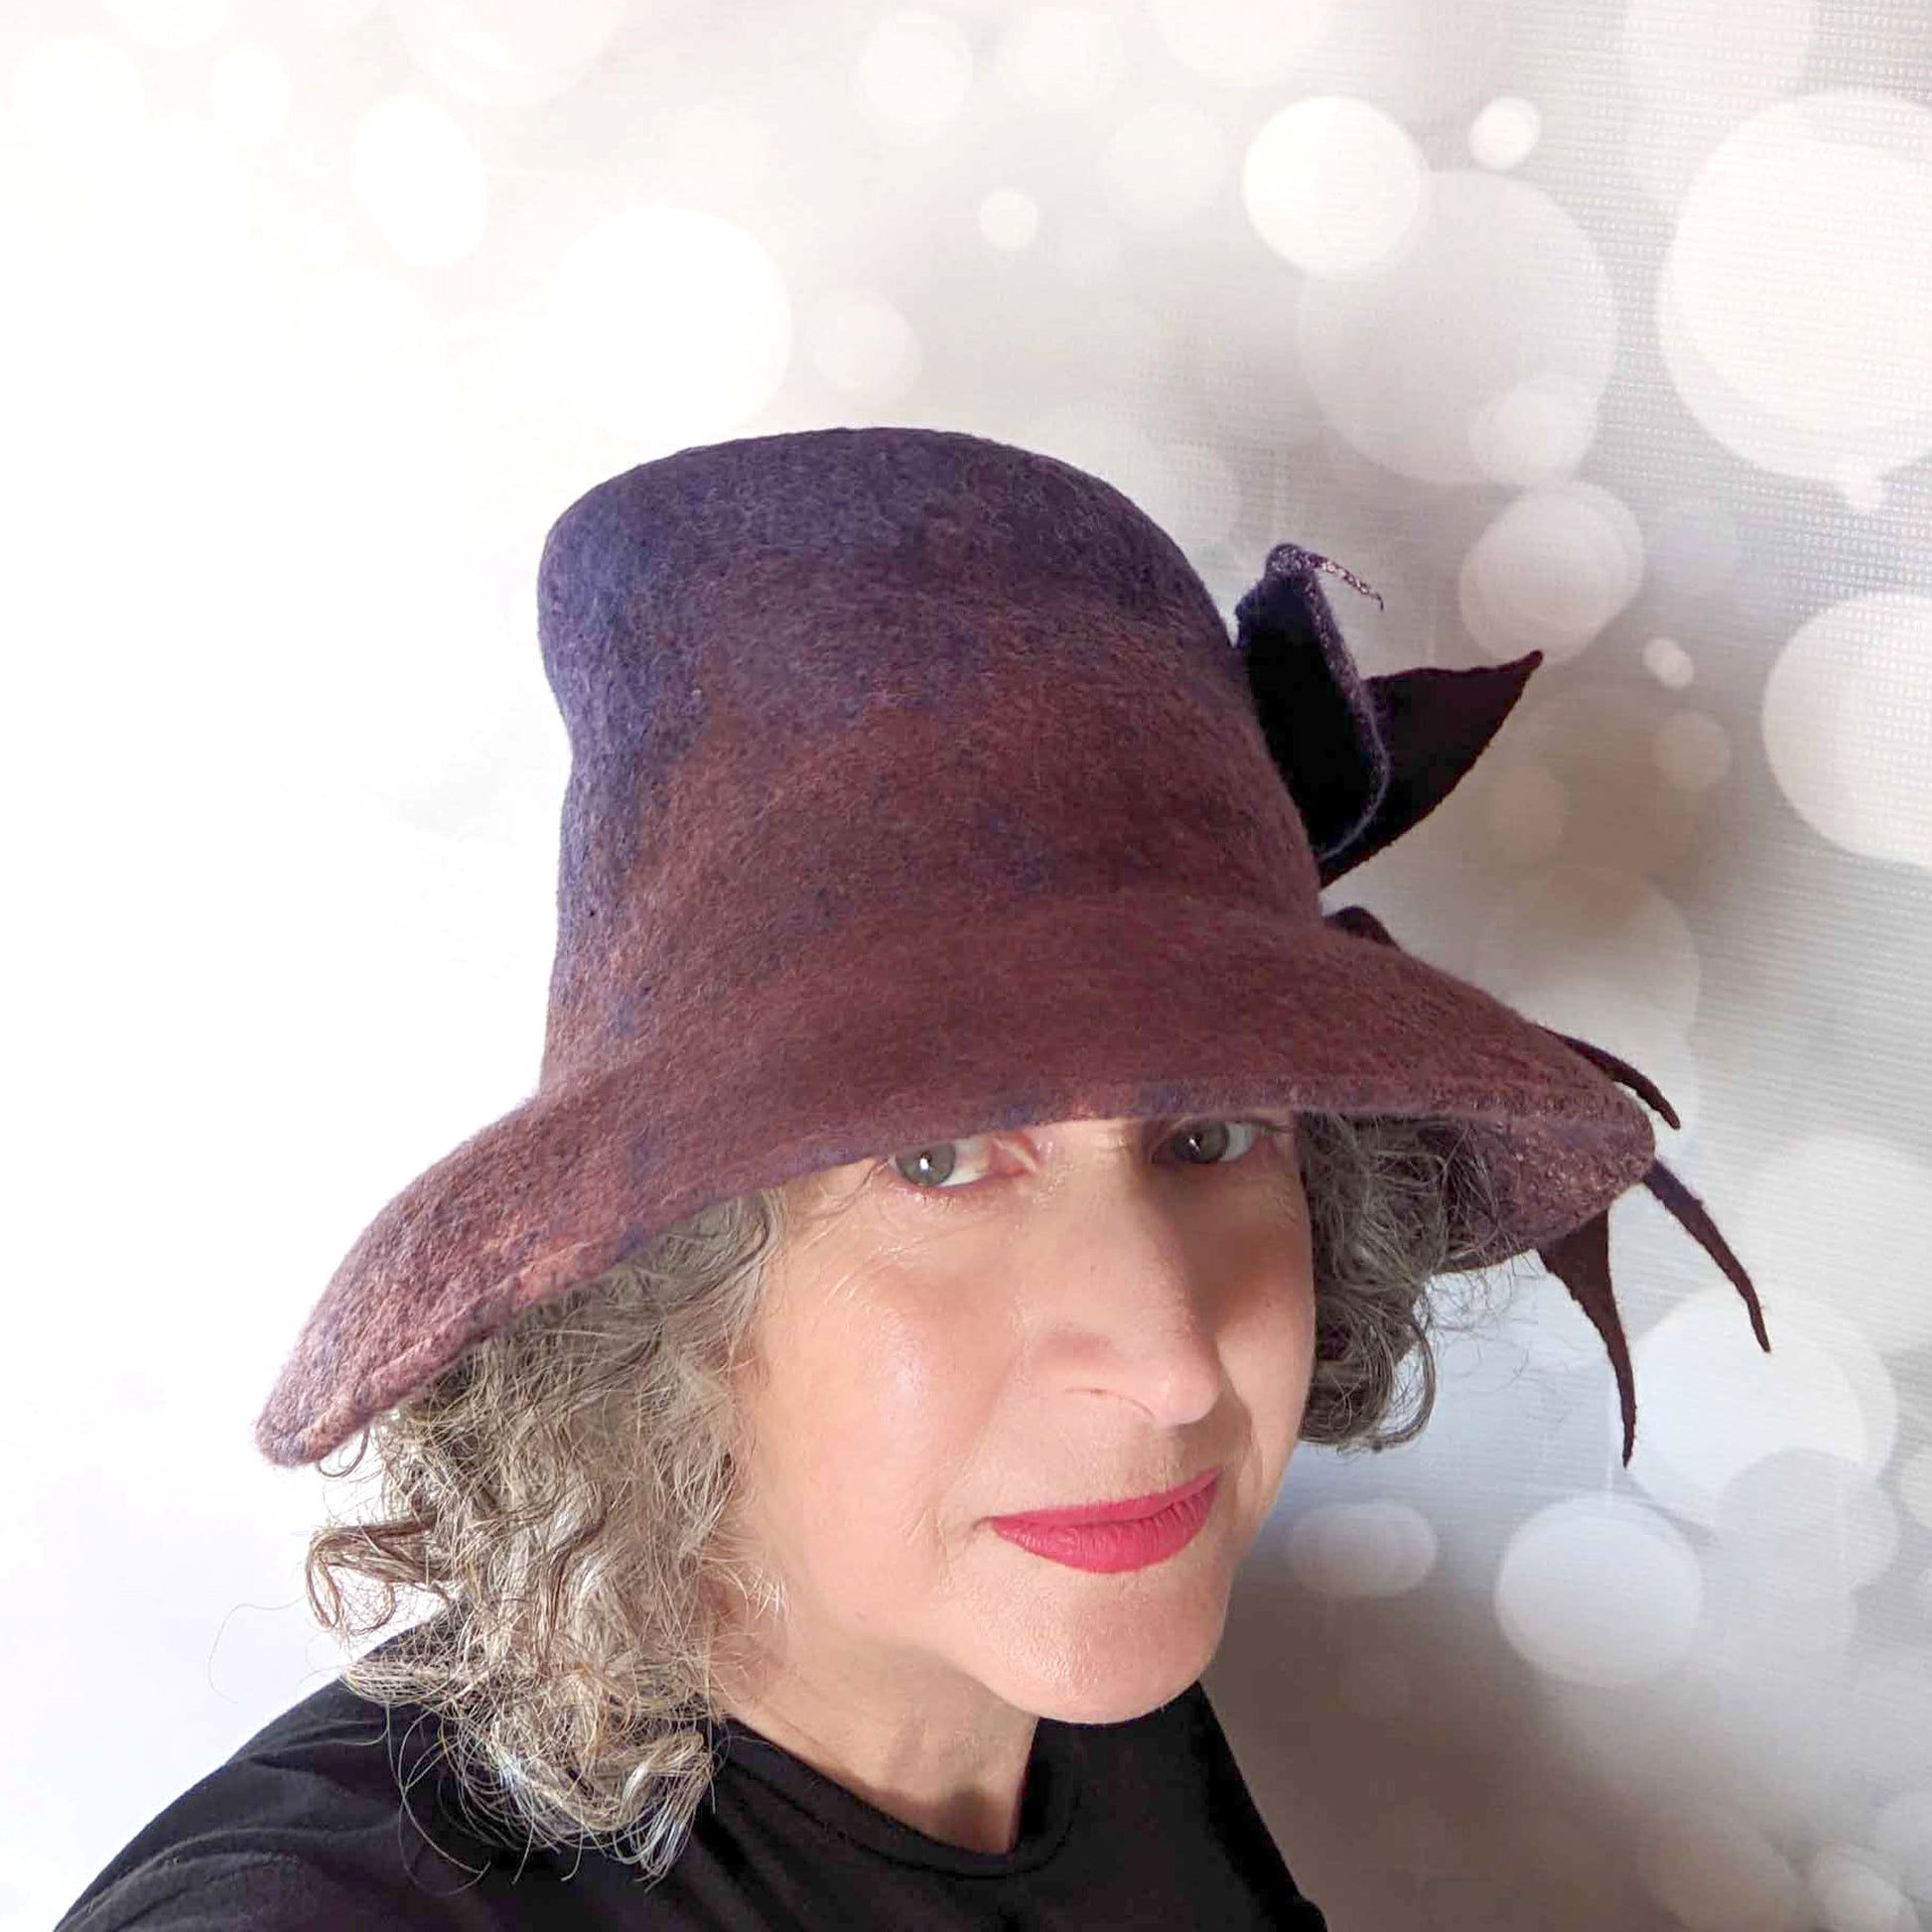 Asymmetrical Brimmed Felt Hat in an Ombre of Navy Brown -threequartersview